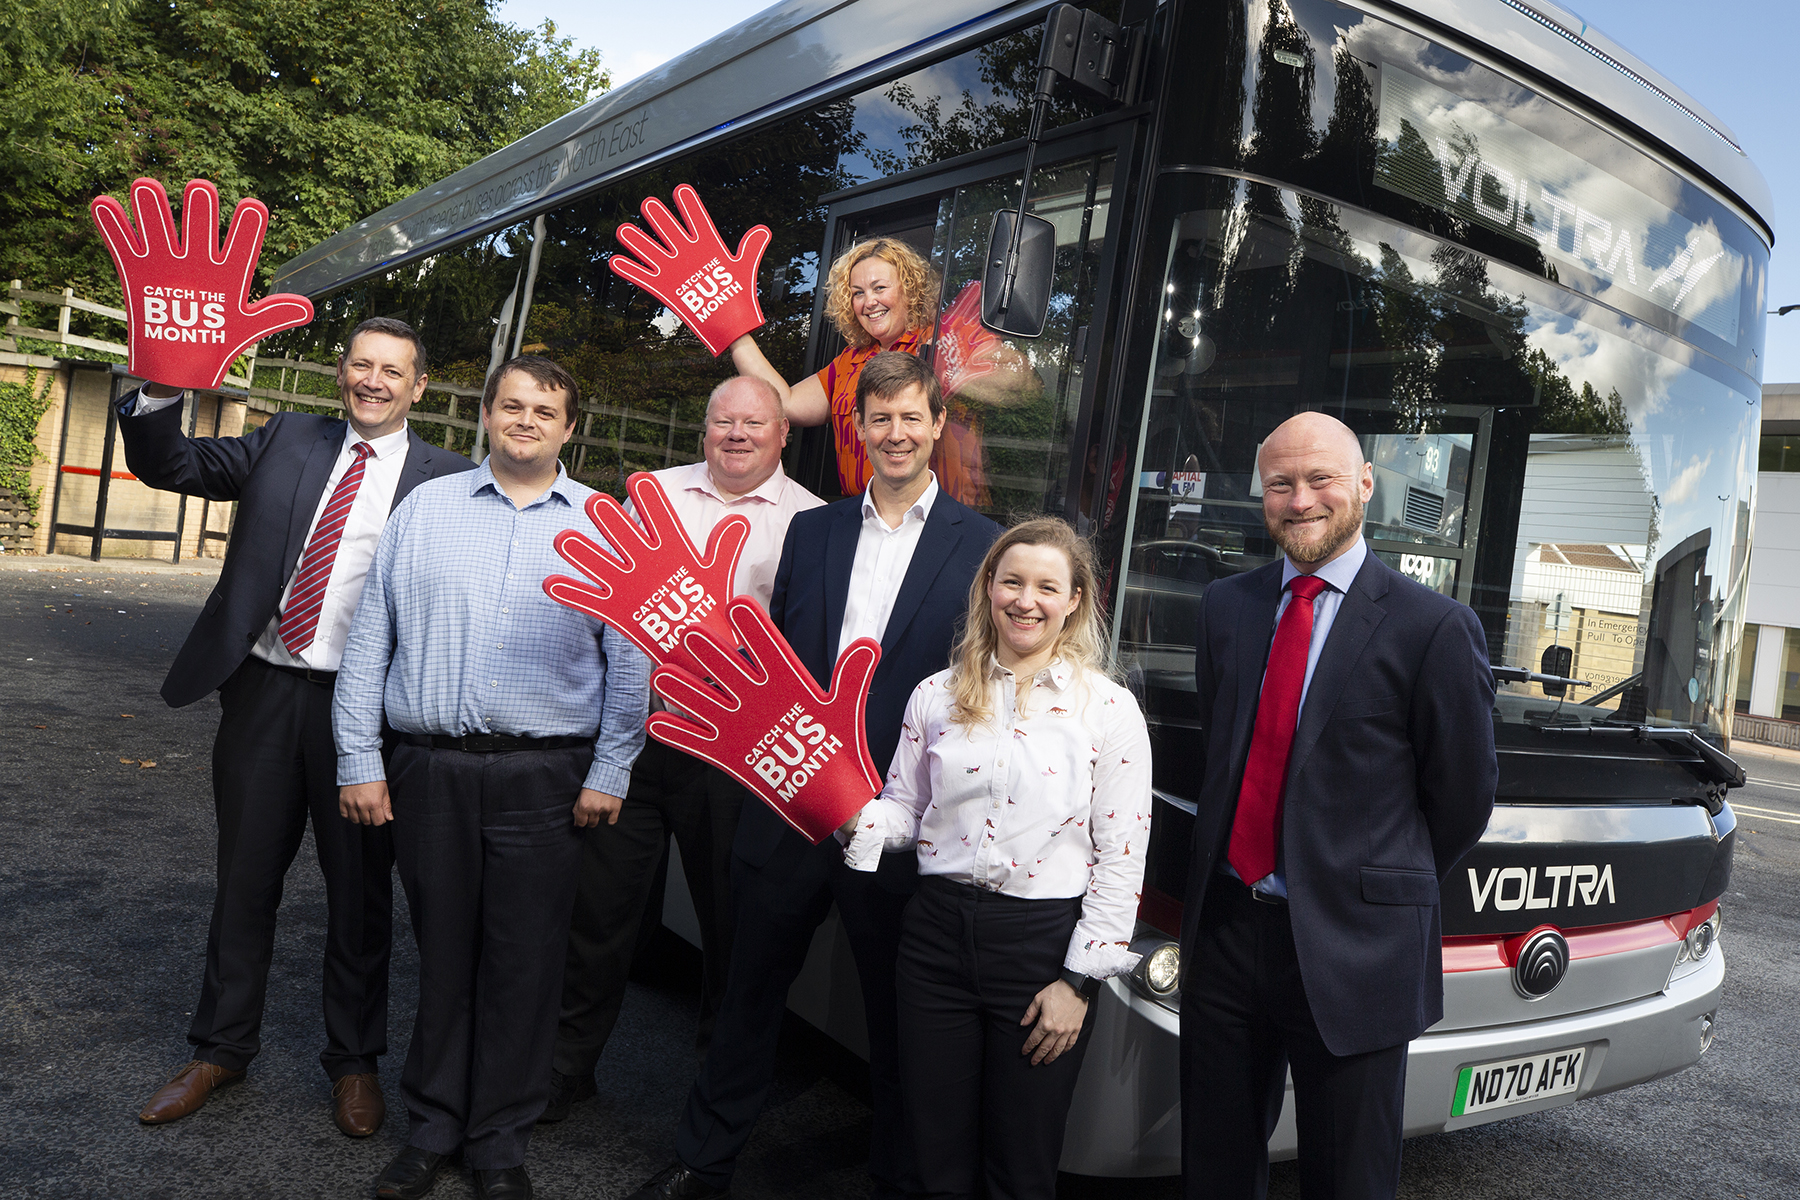 transport north east and go north east with dawn badminton-capps celebrate catch the bus month